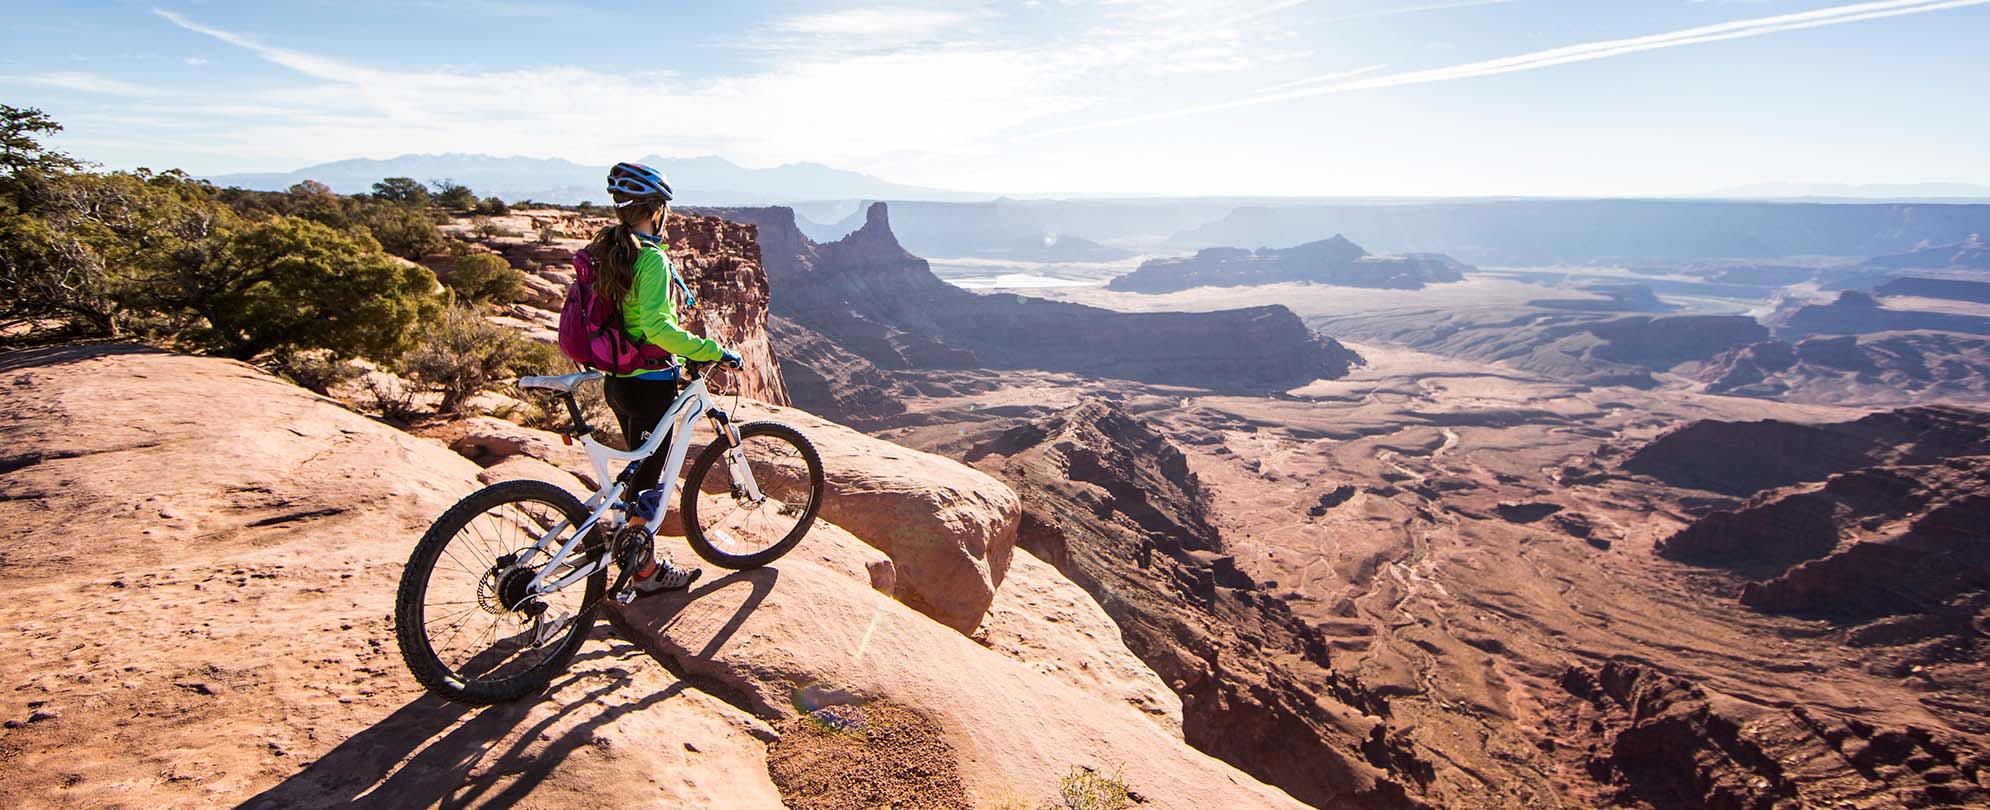 A mountain biker stopped on top of a mountainside in Moab, Utah.